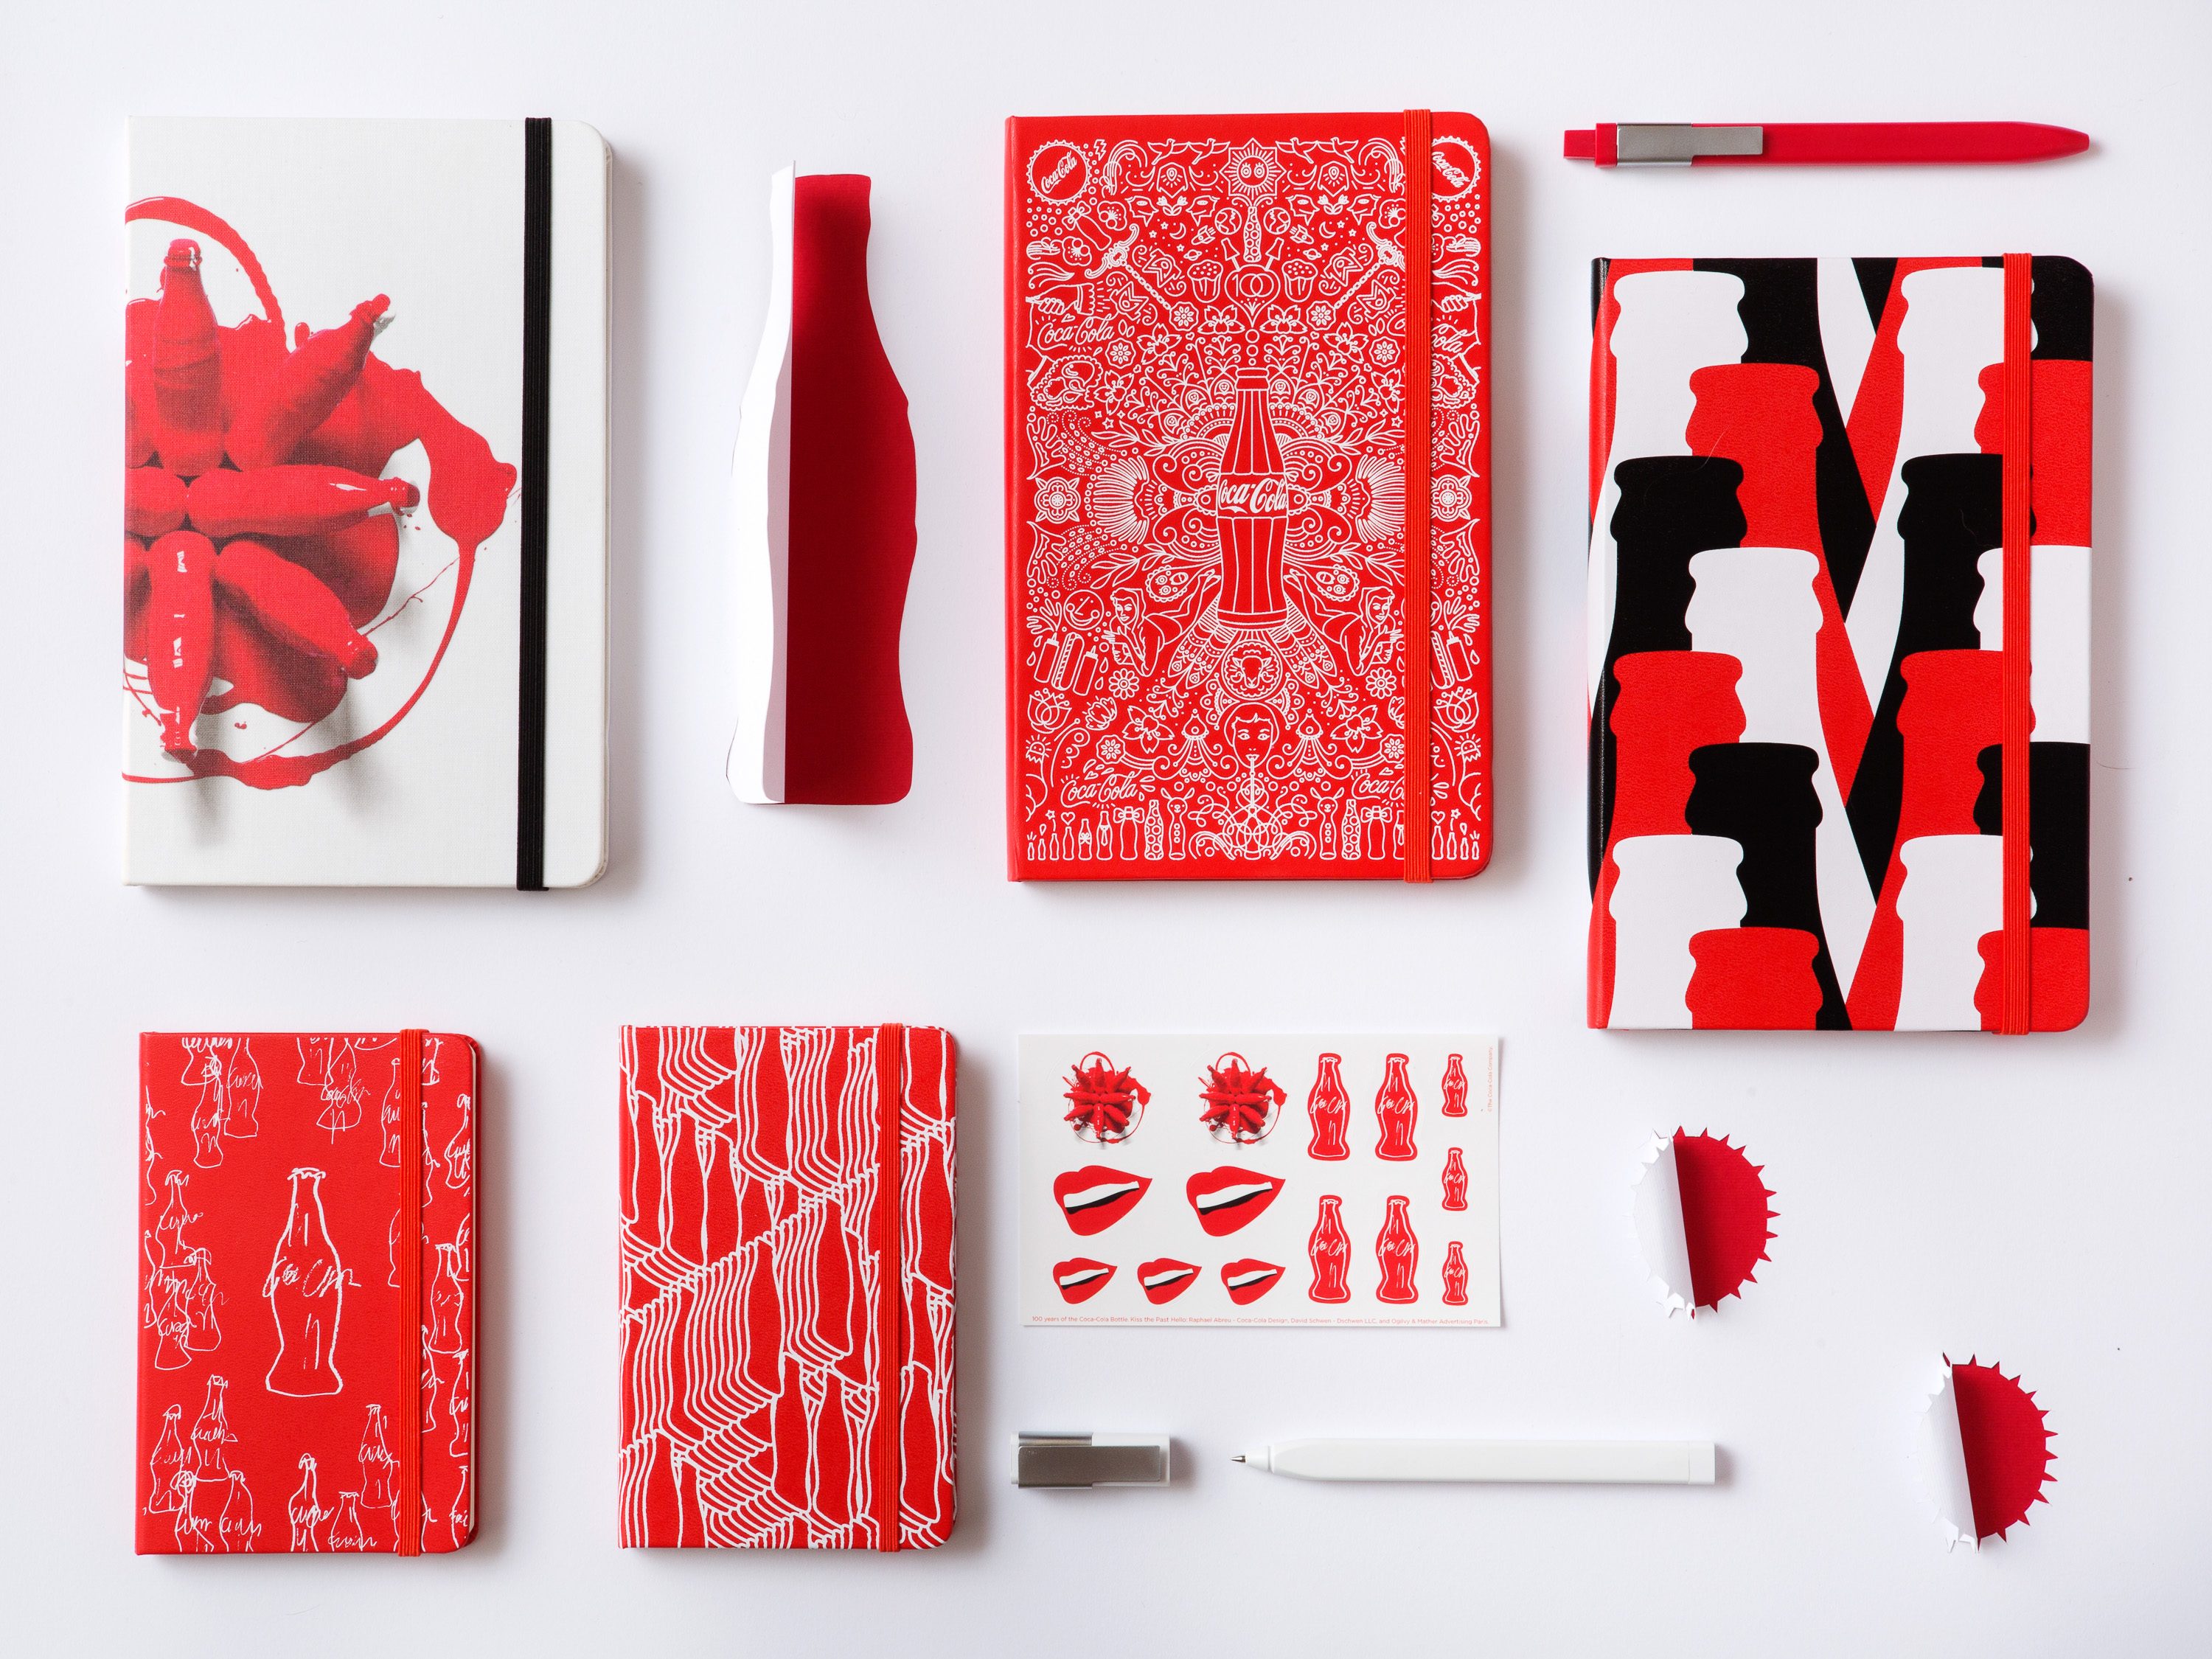 Moleskine Coca-cola Collection. Available from P1160 to P1580 at the following National Book Store branches: Glorietta 1, Greenbelt, Power Plant Mall-Rockwell, Shangri-La Plaza Mall, and Trinoma. Photo courtesy of National Bookstore  